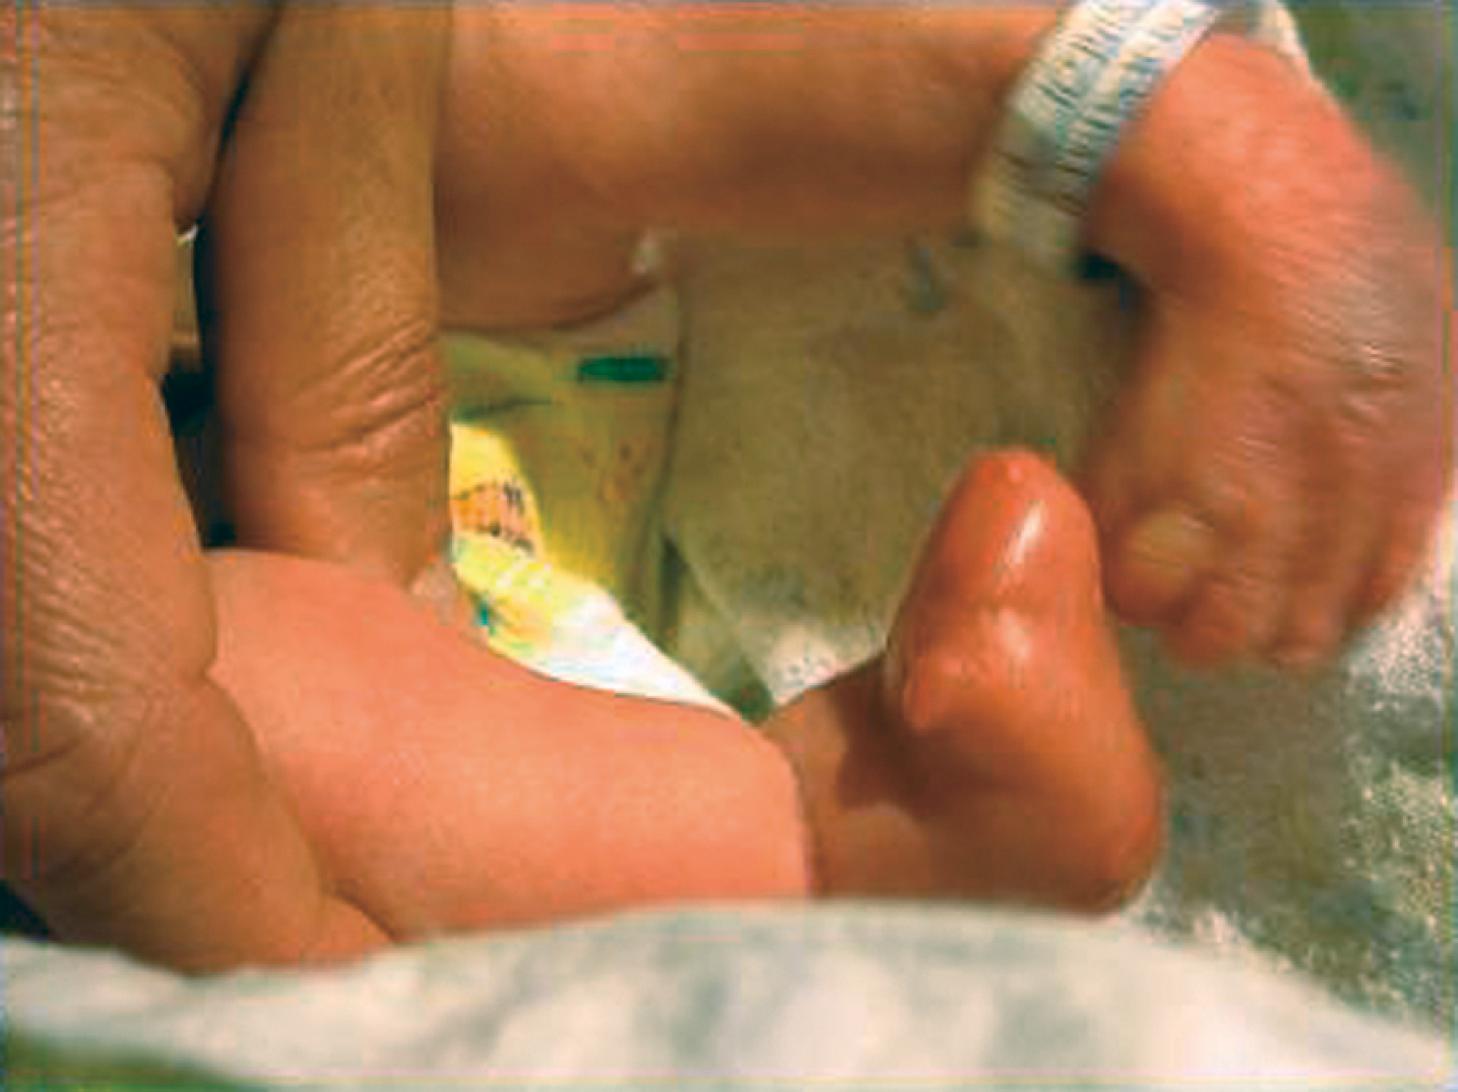 Fig. 1.3, Amniotic band syndrome; note the constriction ring at the ankle and amputation of the toes, a sequela to the amniotic bands.